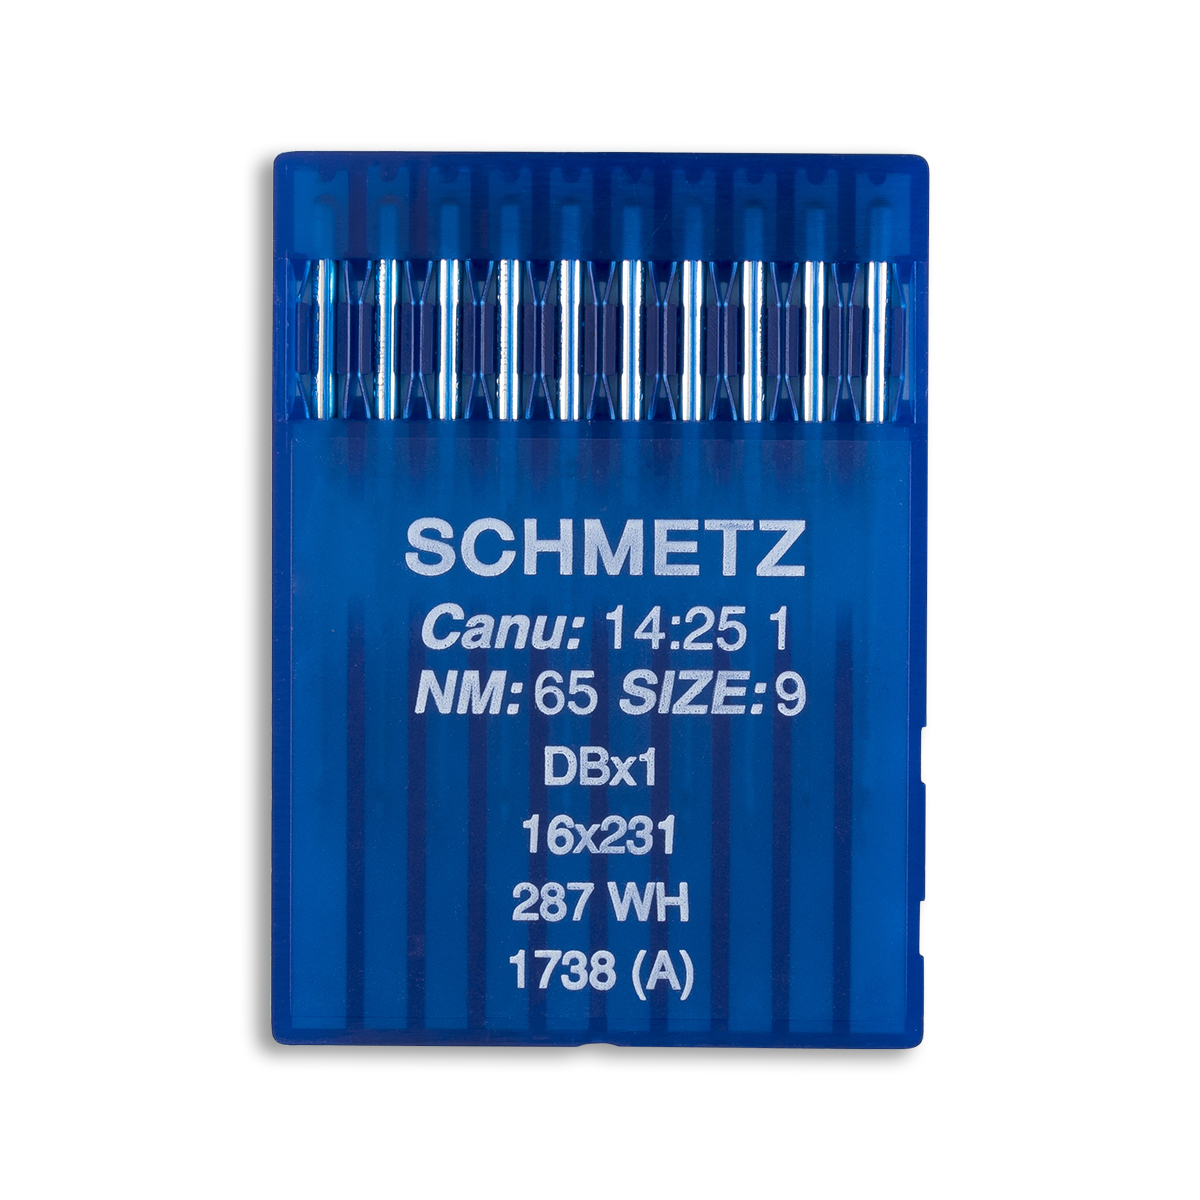 Pack of 10 for sewing machines juki singer consew Schmetz 16X231 Needles DBX1 